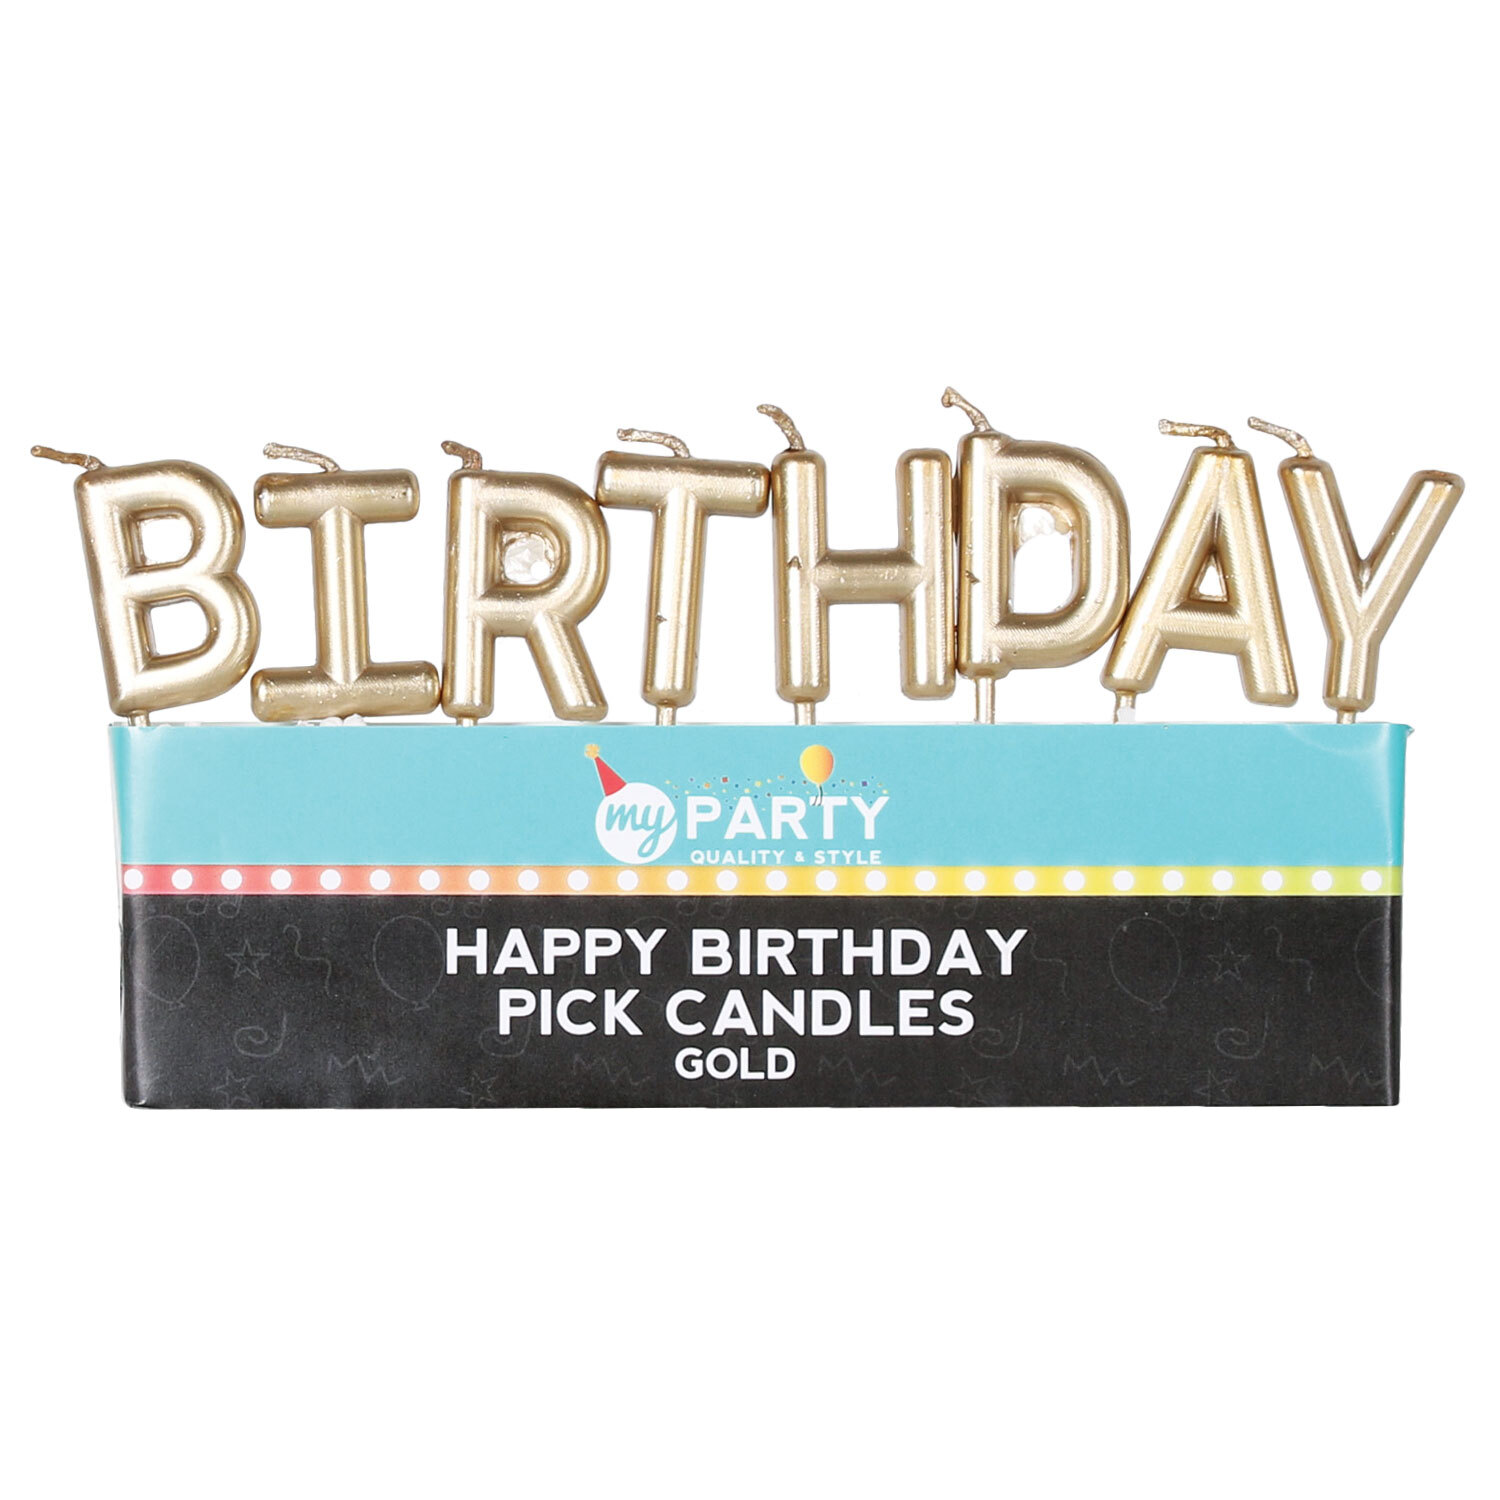 Happy Birthday Pick Candles - Gold Image 3